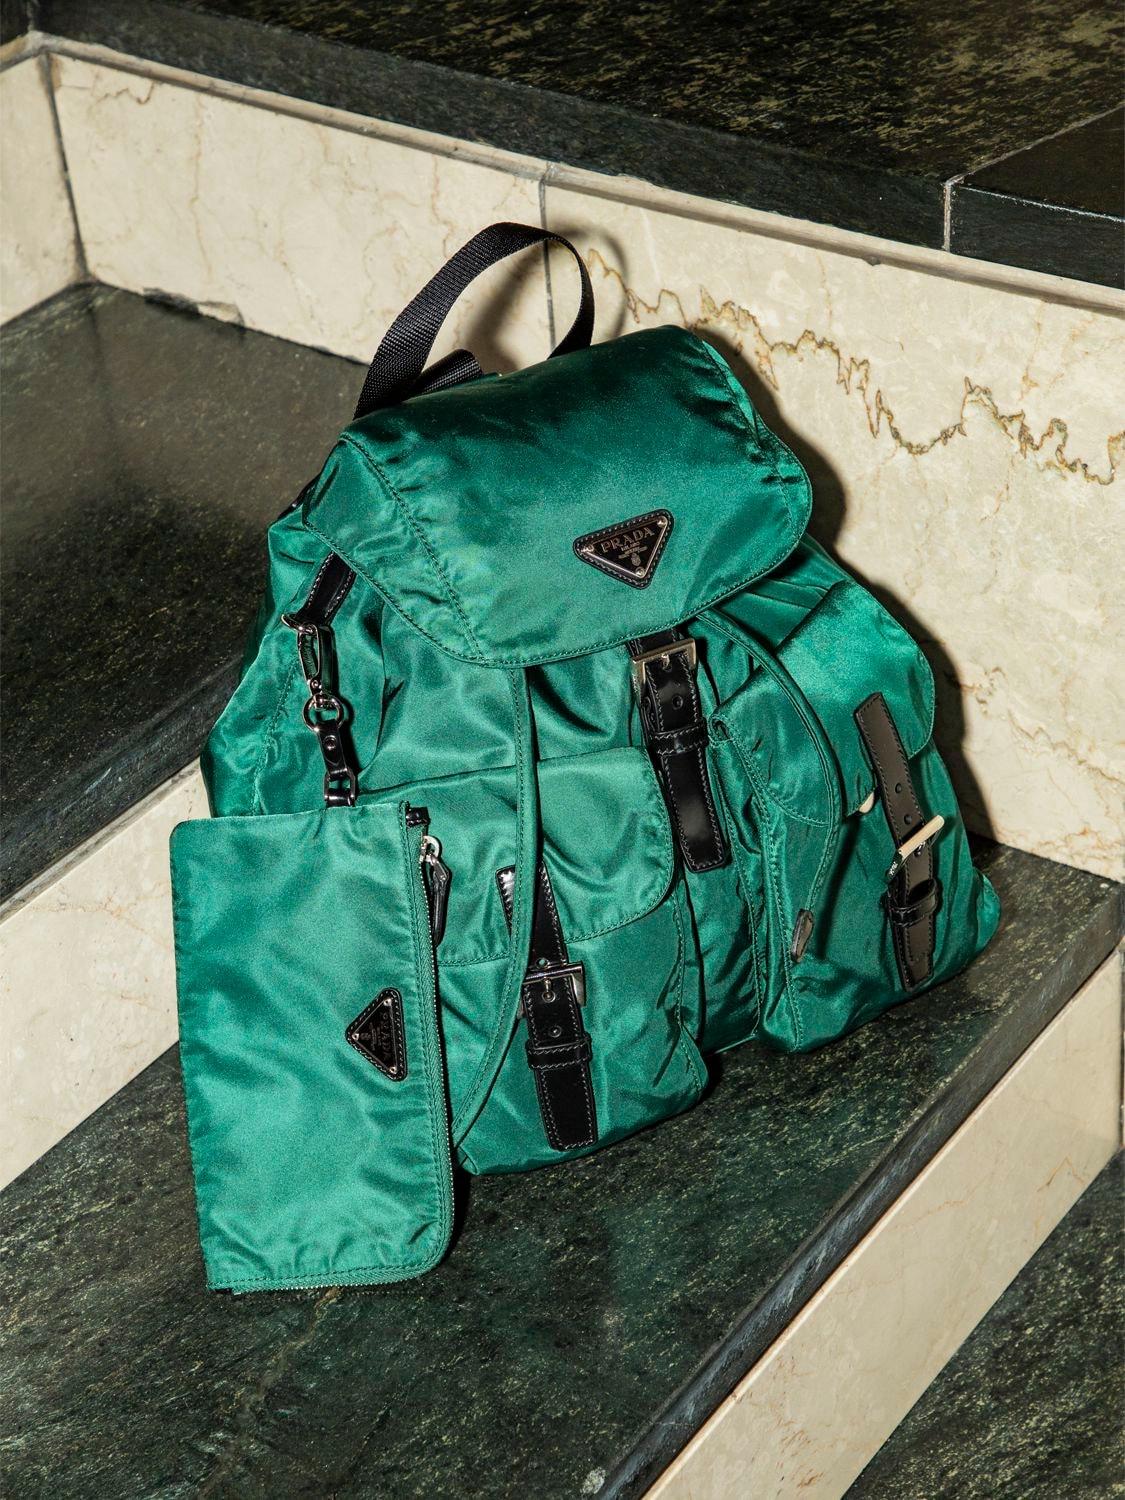 Prada Synthetic Lvr Exclusive Nylon Canvas Backpack in Green - Lyst